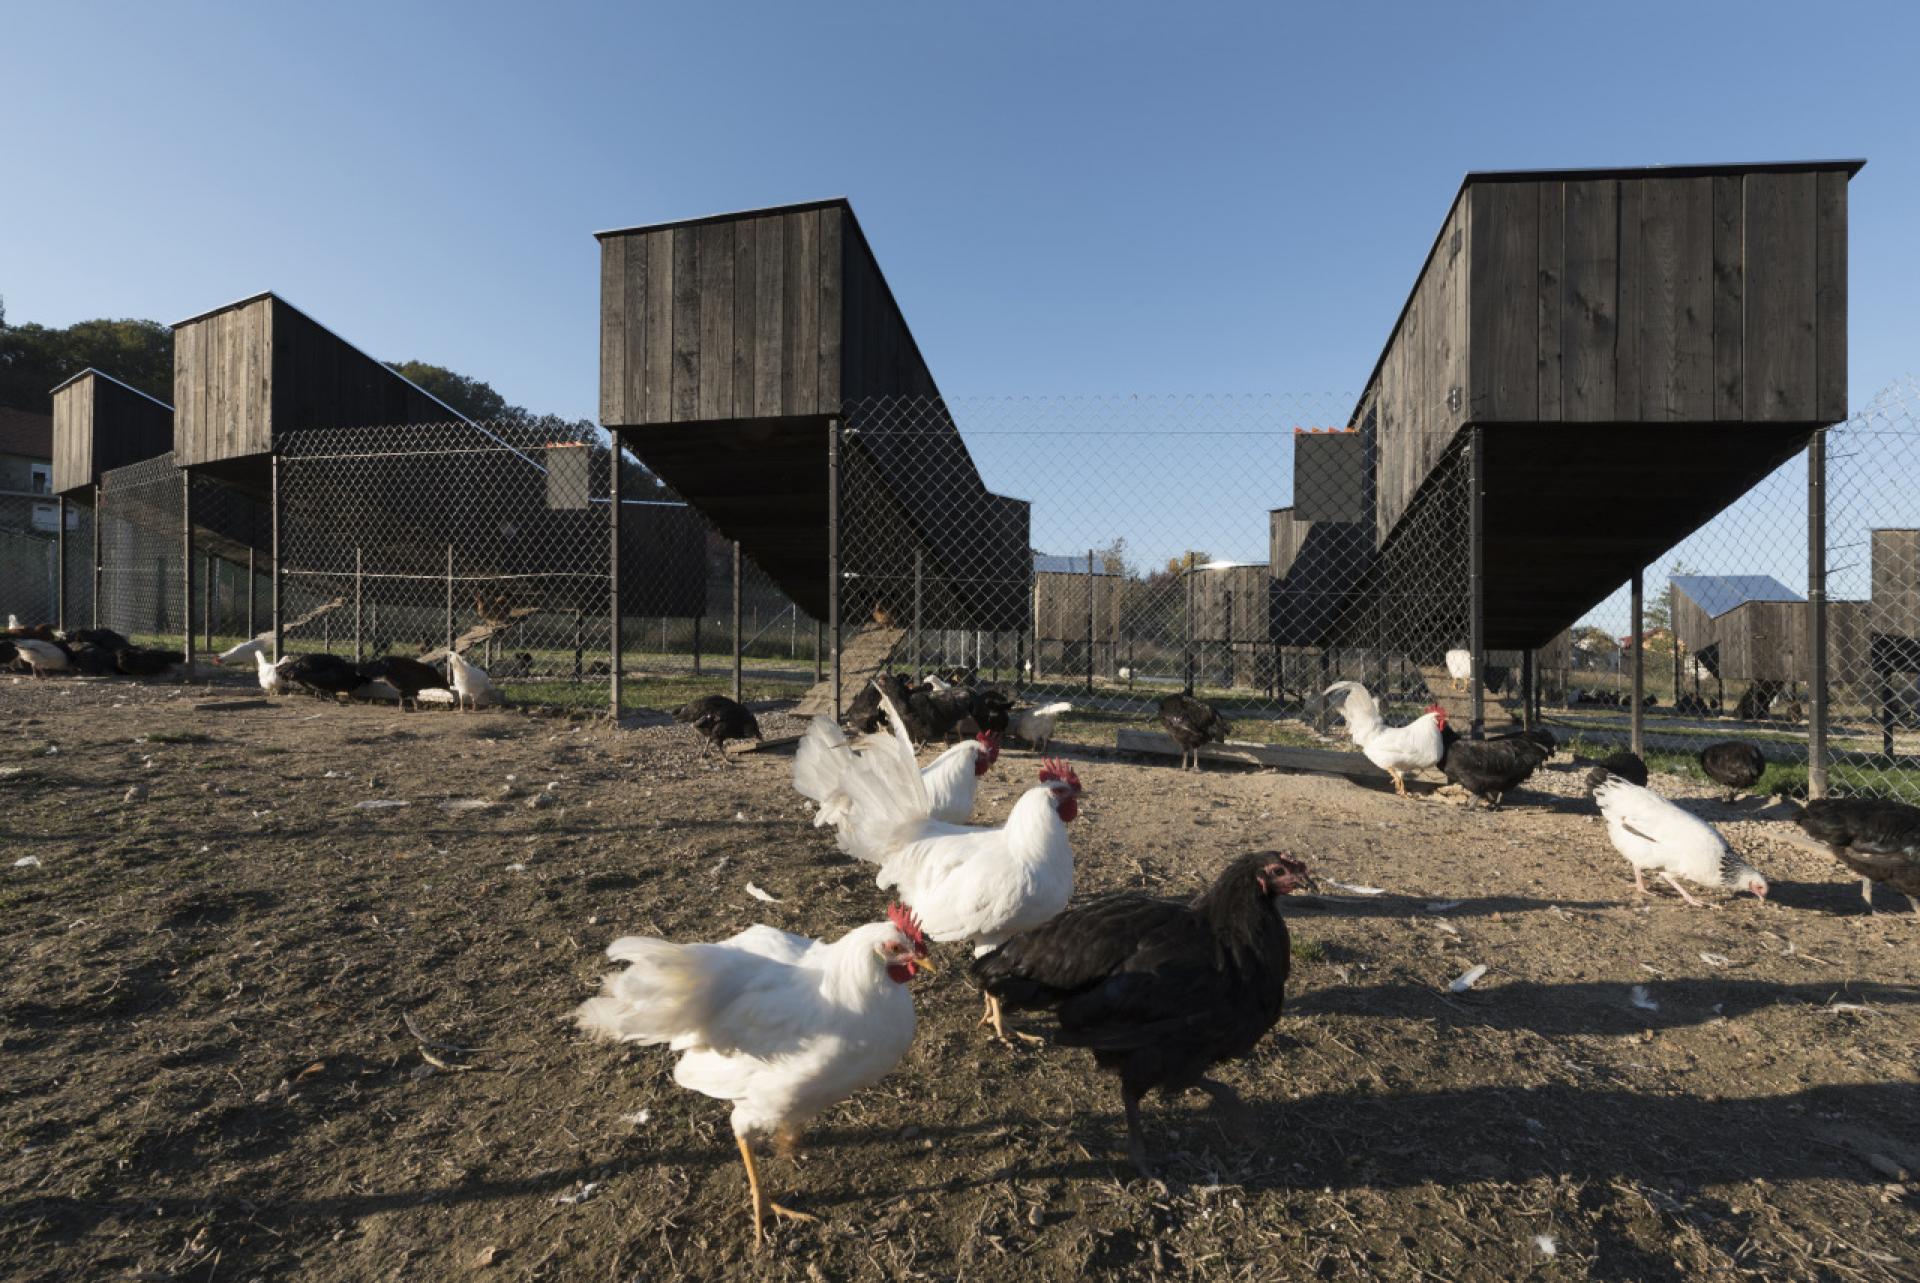 Being not only an eco friendly farm, but a tourist-educational site as well, the settlement is introducing visitors to chicken raising. | Photo © Dorotić+Bosnić